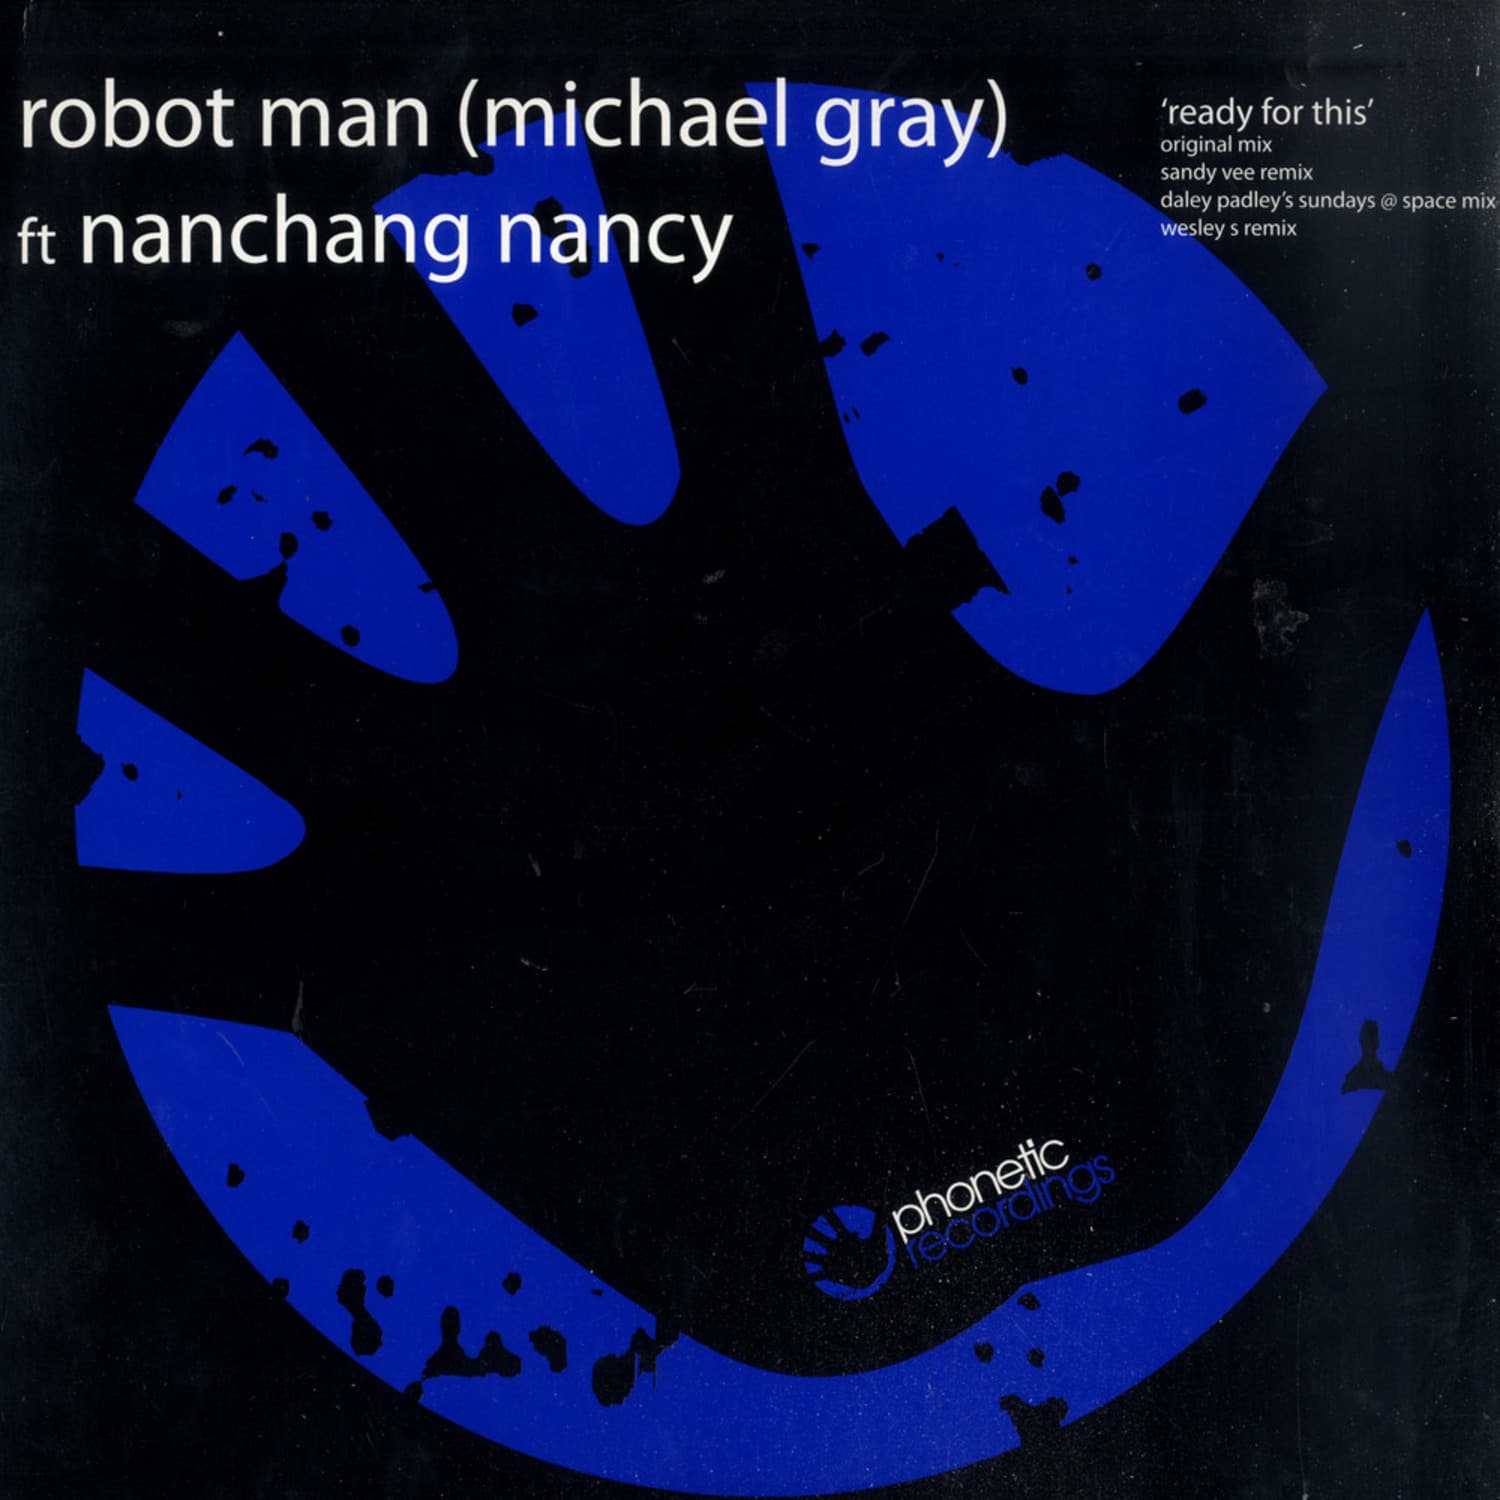 Michael Gray pres. Robot Man - READY FOR THIS